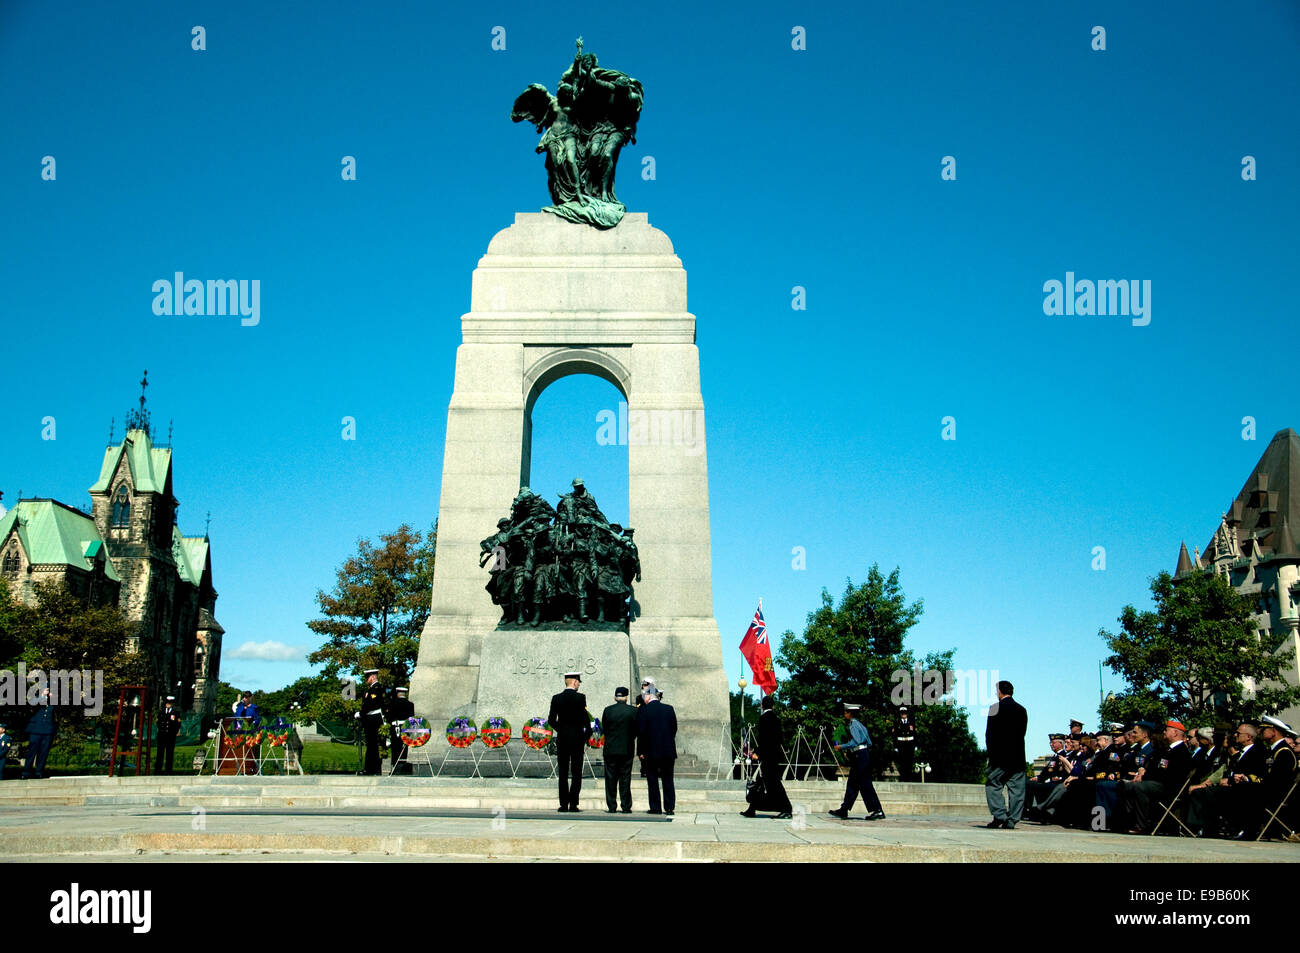 A solemn ceremony takes place at the War Memorial in Ottawa, Canada's capital, scene of a fatal gun attack days later Stock Photo